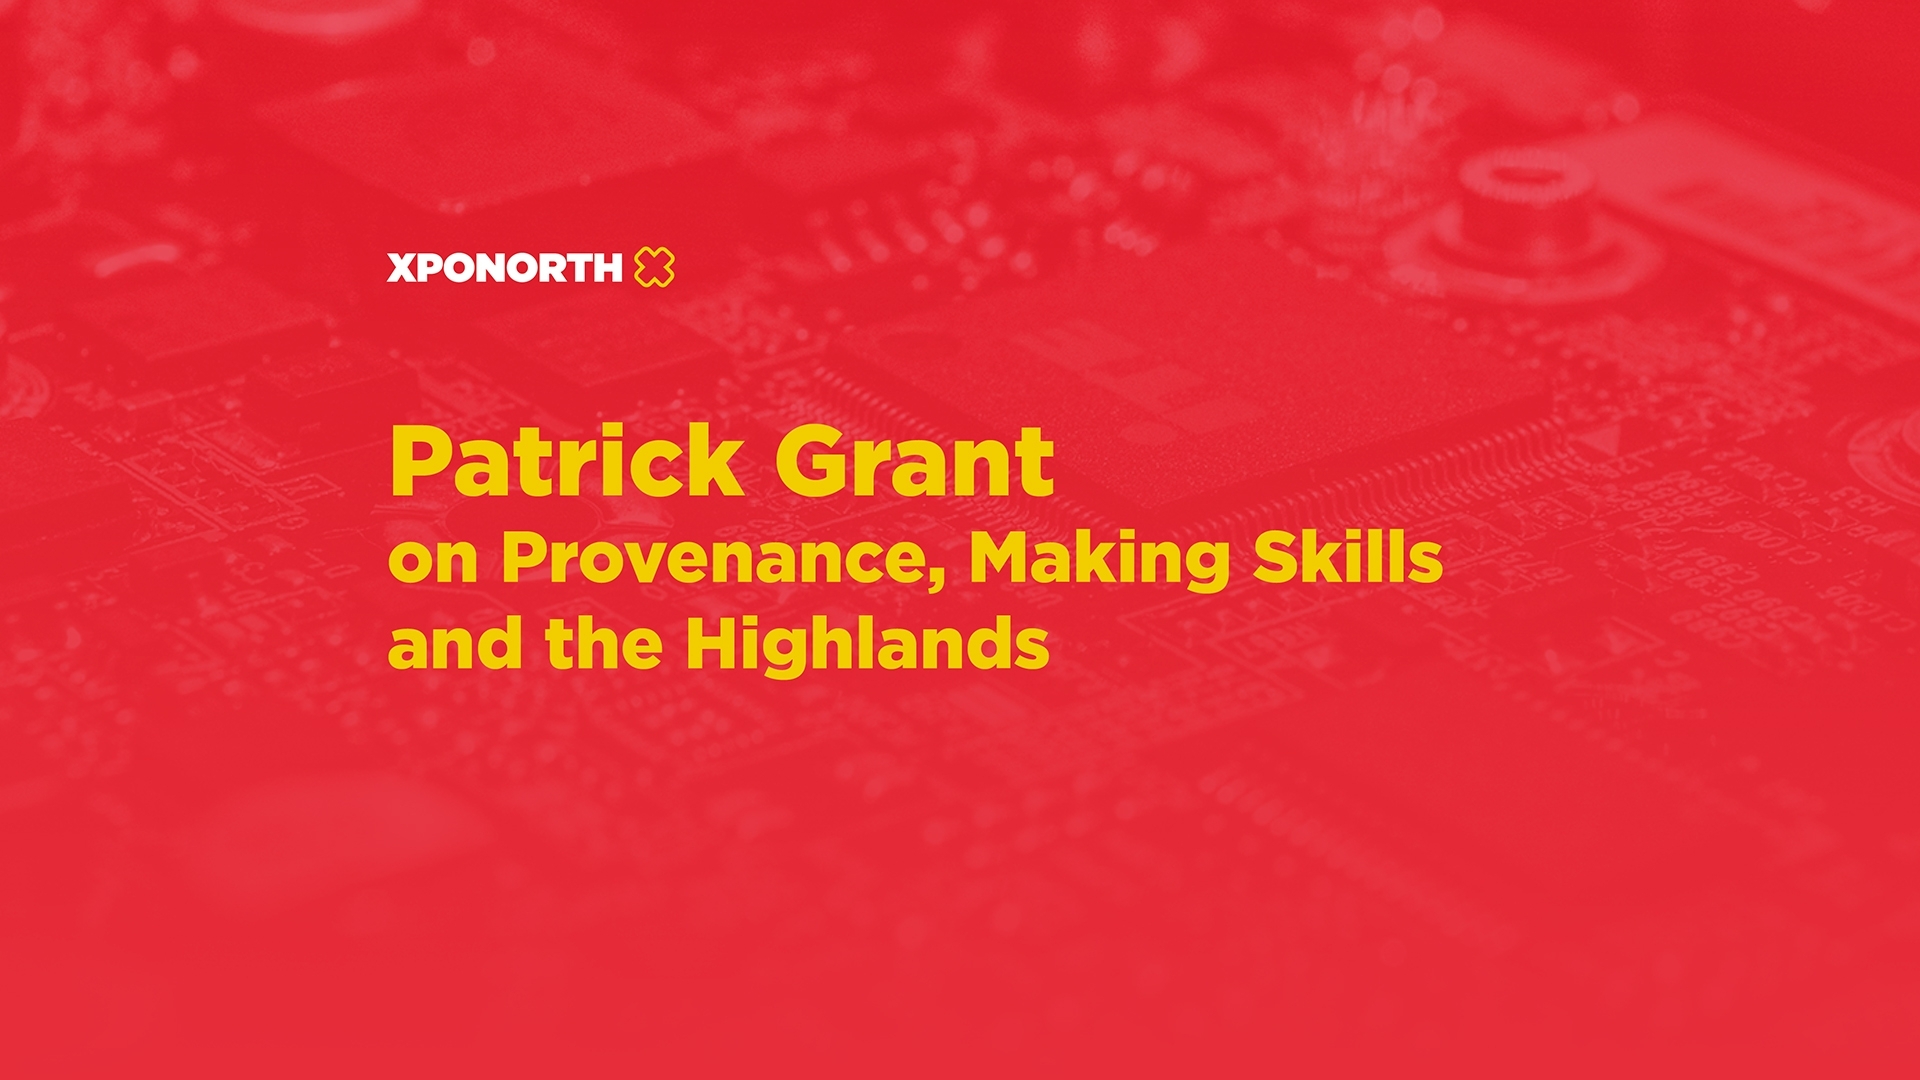 Patrick Grant on Provenance, Making Skills and the Highlands